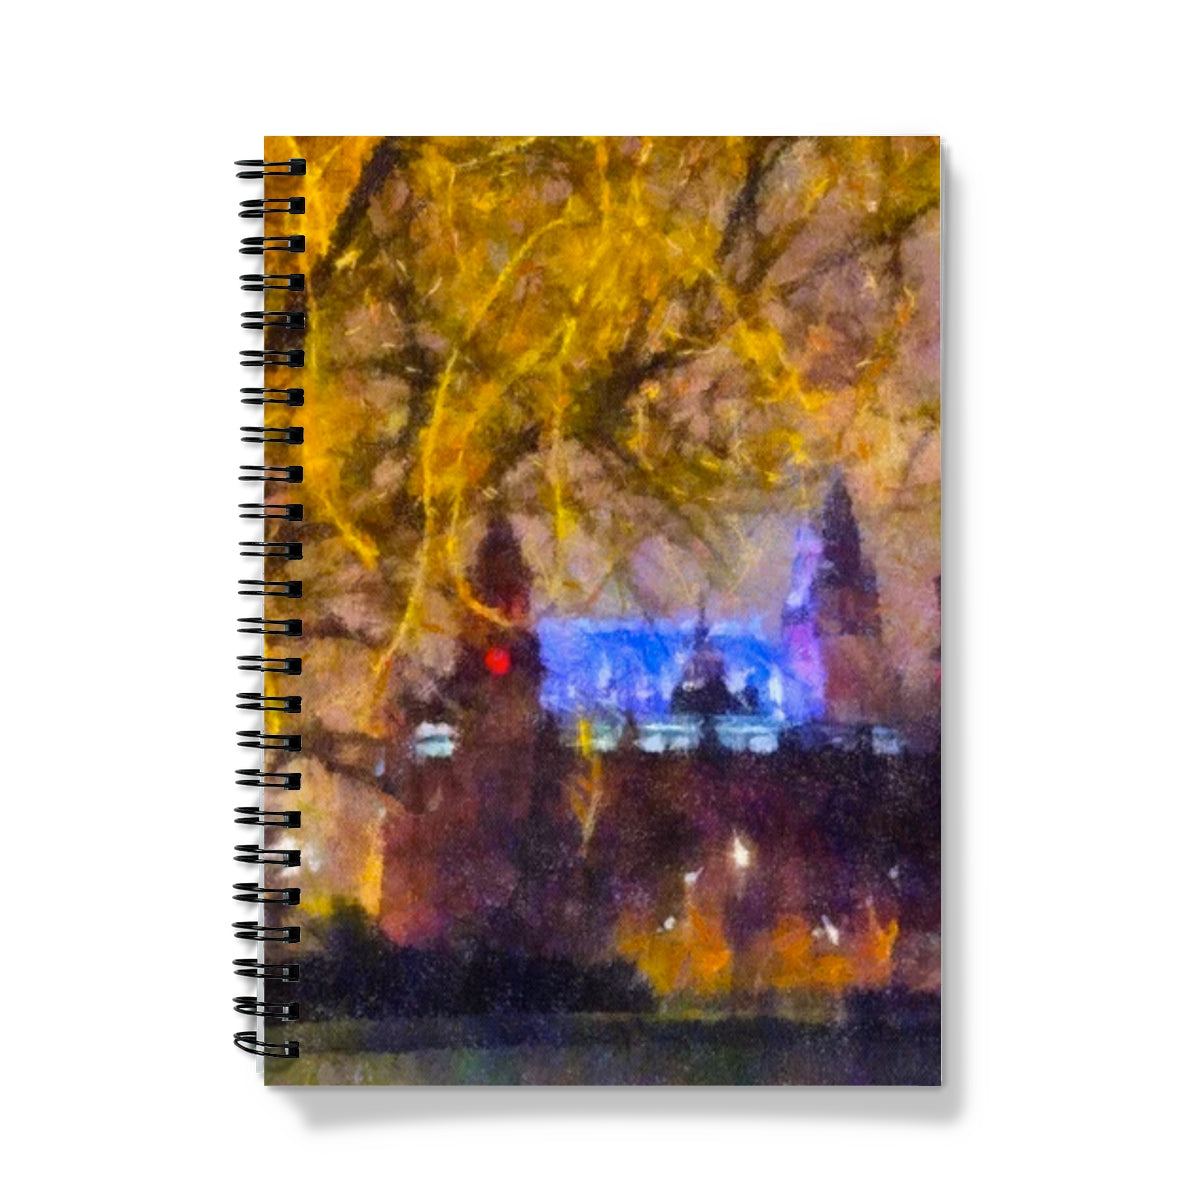 Kelvingrove Nights Glasgow Art Gifts Notebook-Journals & Notebooks-Edinburgh & Glasgow Art Gallery-A4-Lined-Paintings, Prints, Homeware, Art Gifts From Scotland By Scottish Artist Kevin Hunter